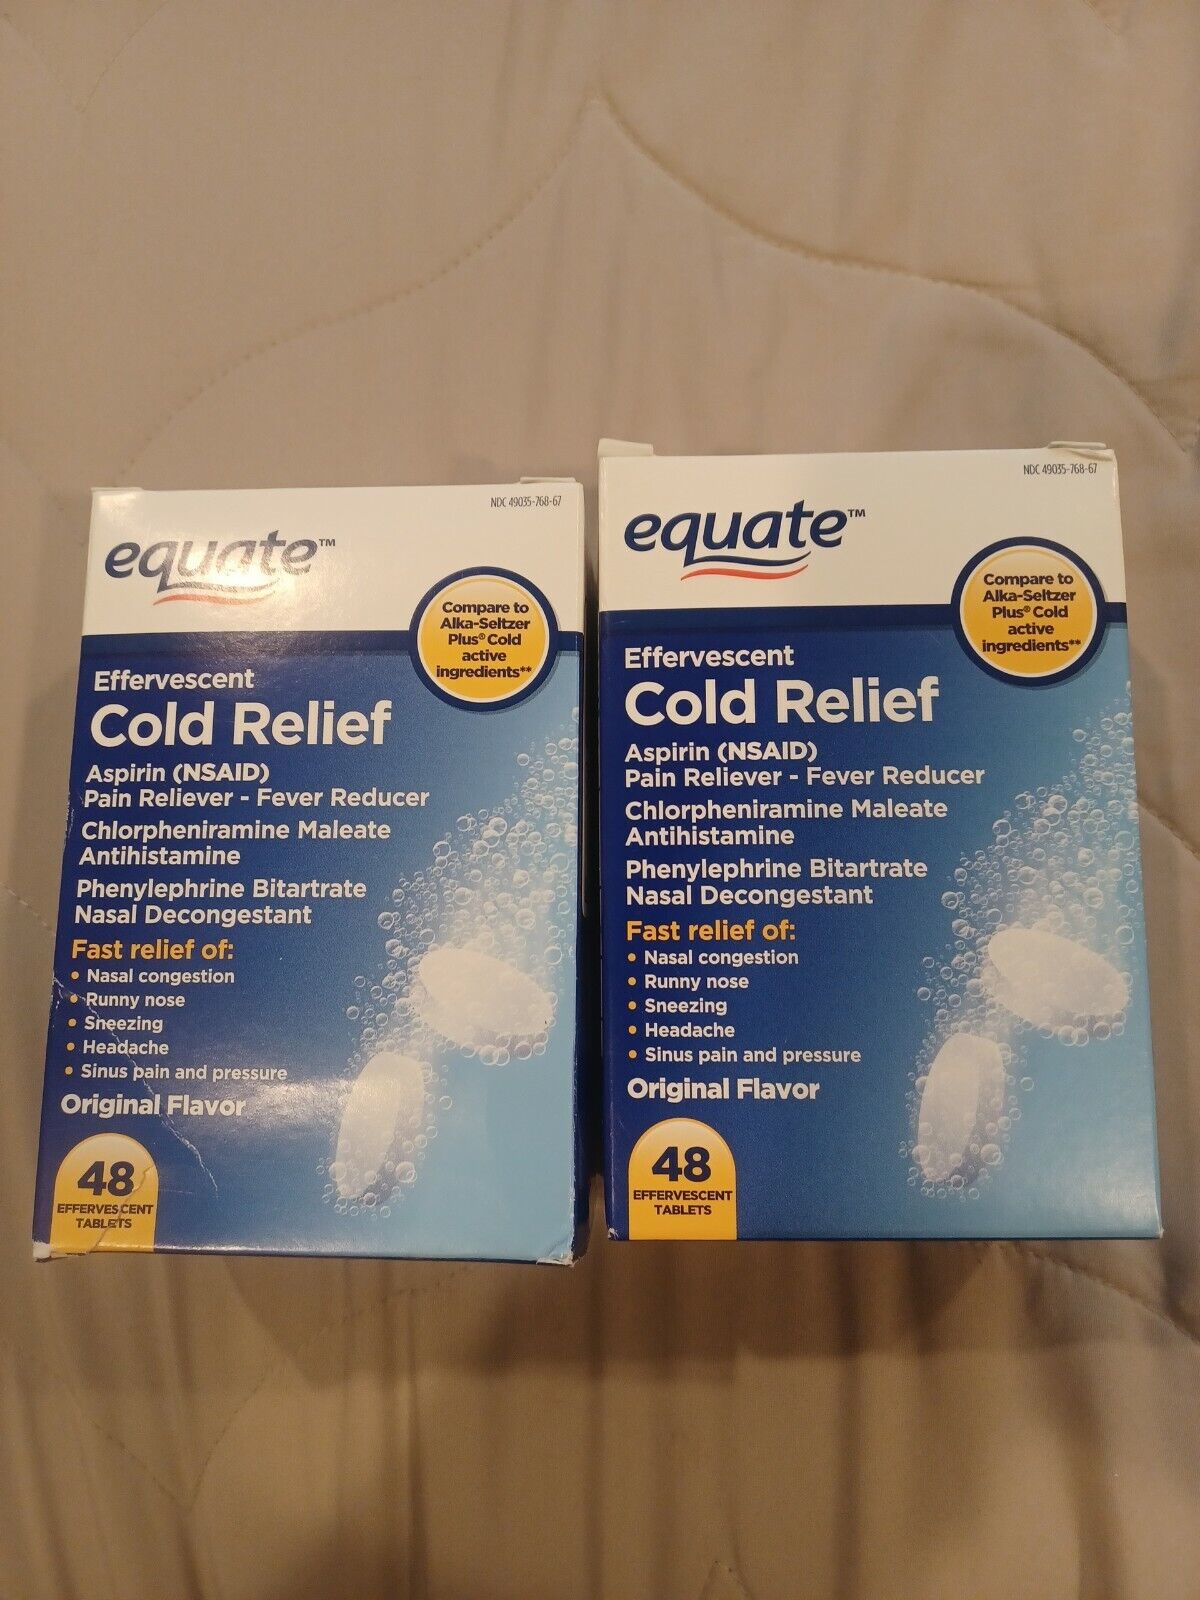 2 Equate Effervescent Cold Relief Tablets, 325 mg, 48 Count 96 total tablets